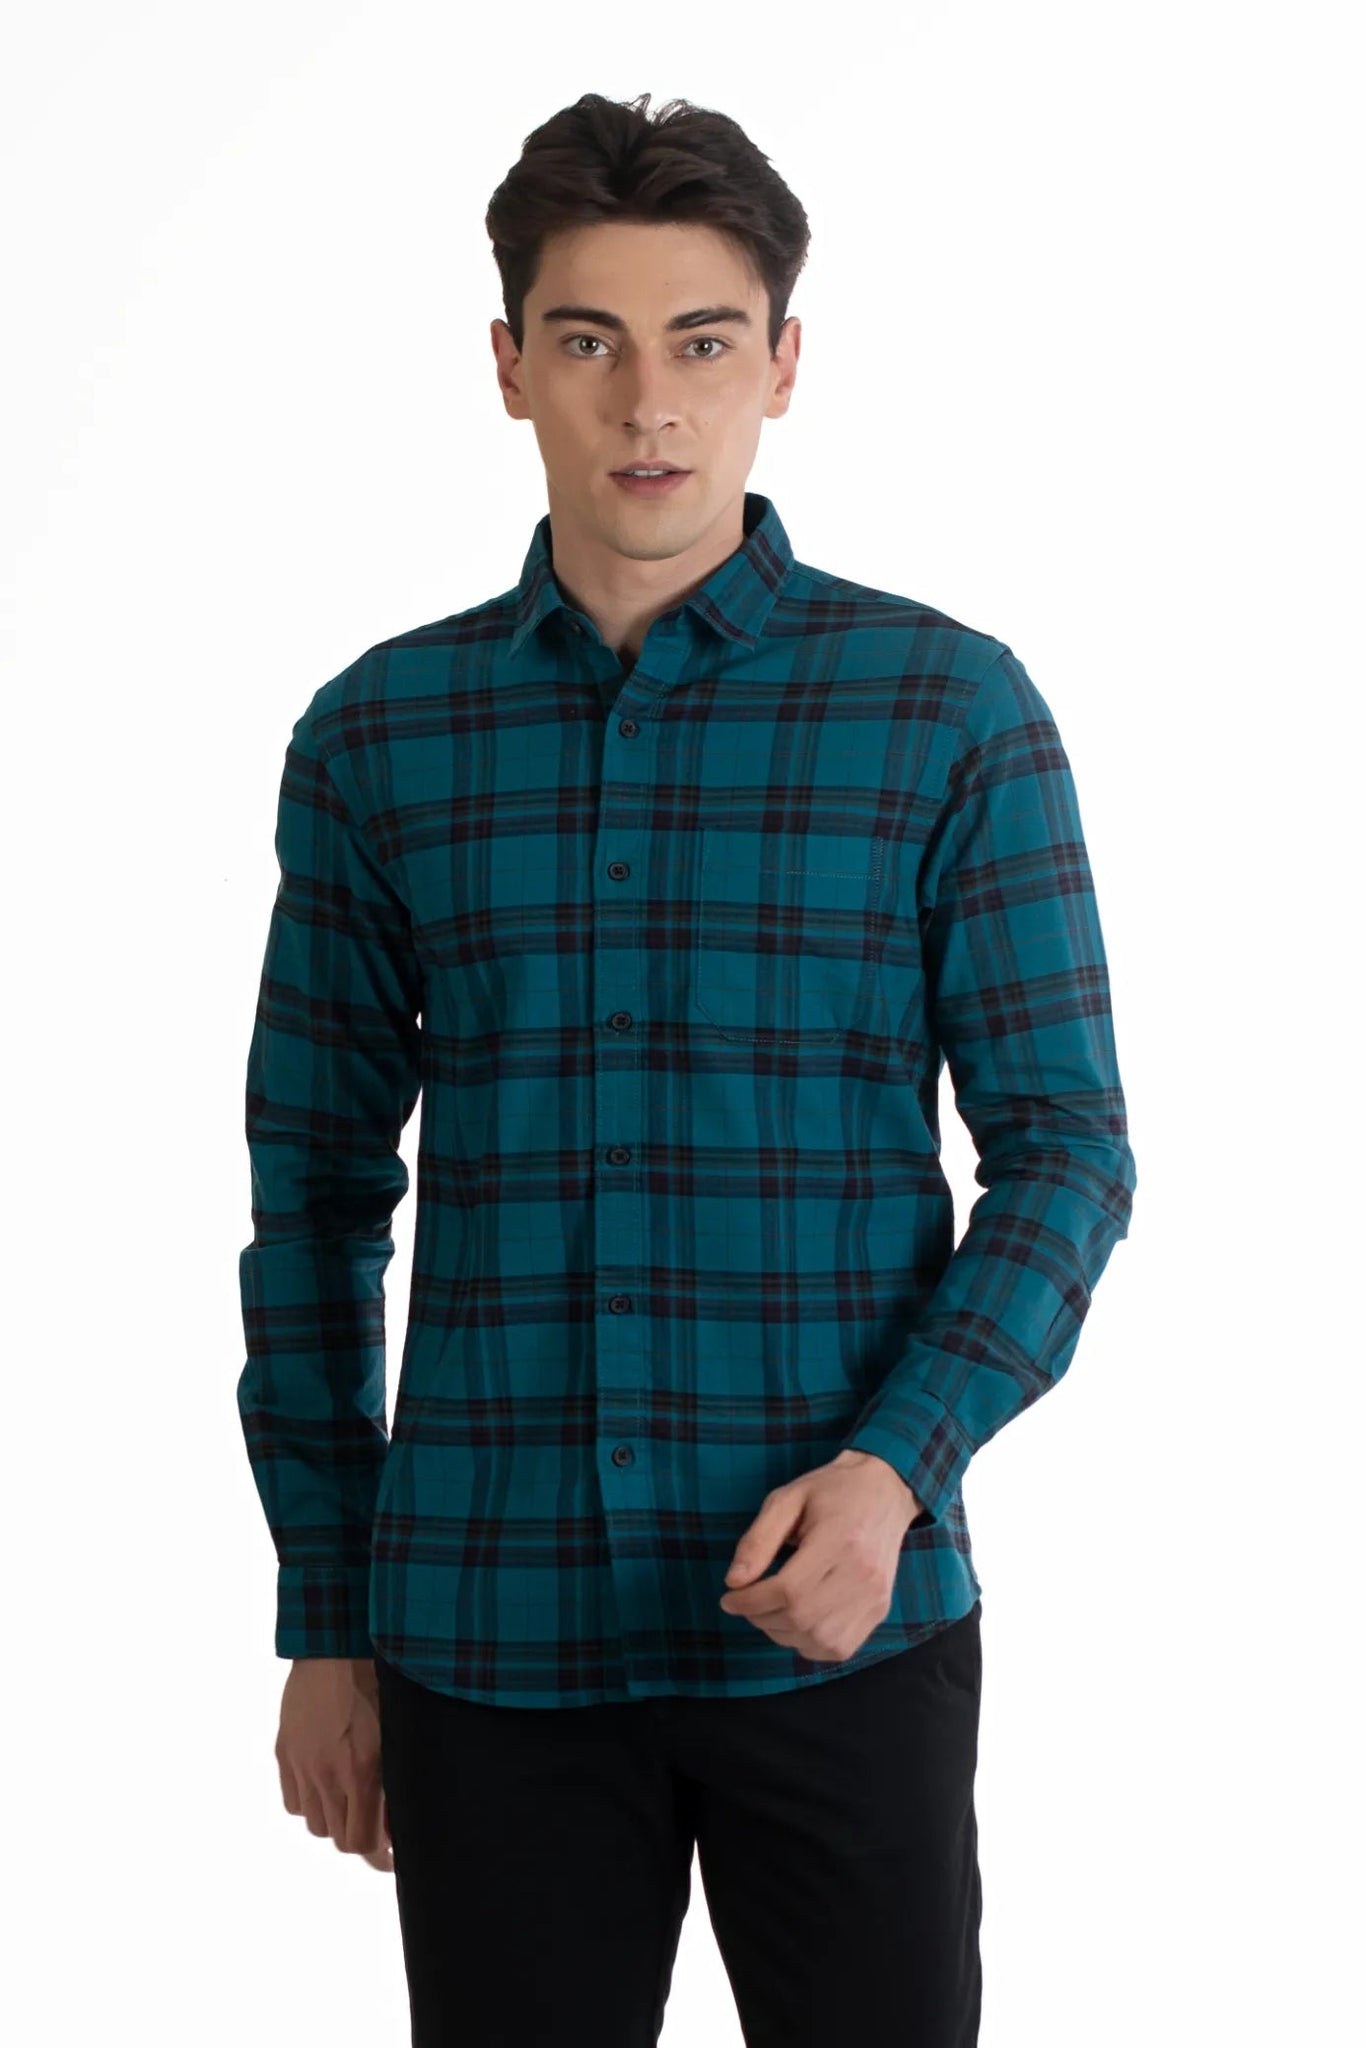 Buy Flannel Oxford Shirts Online